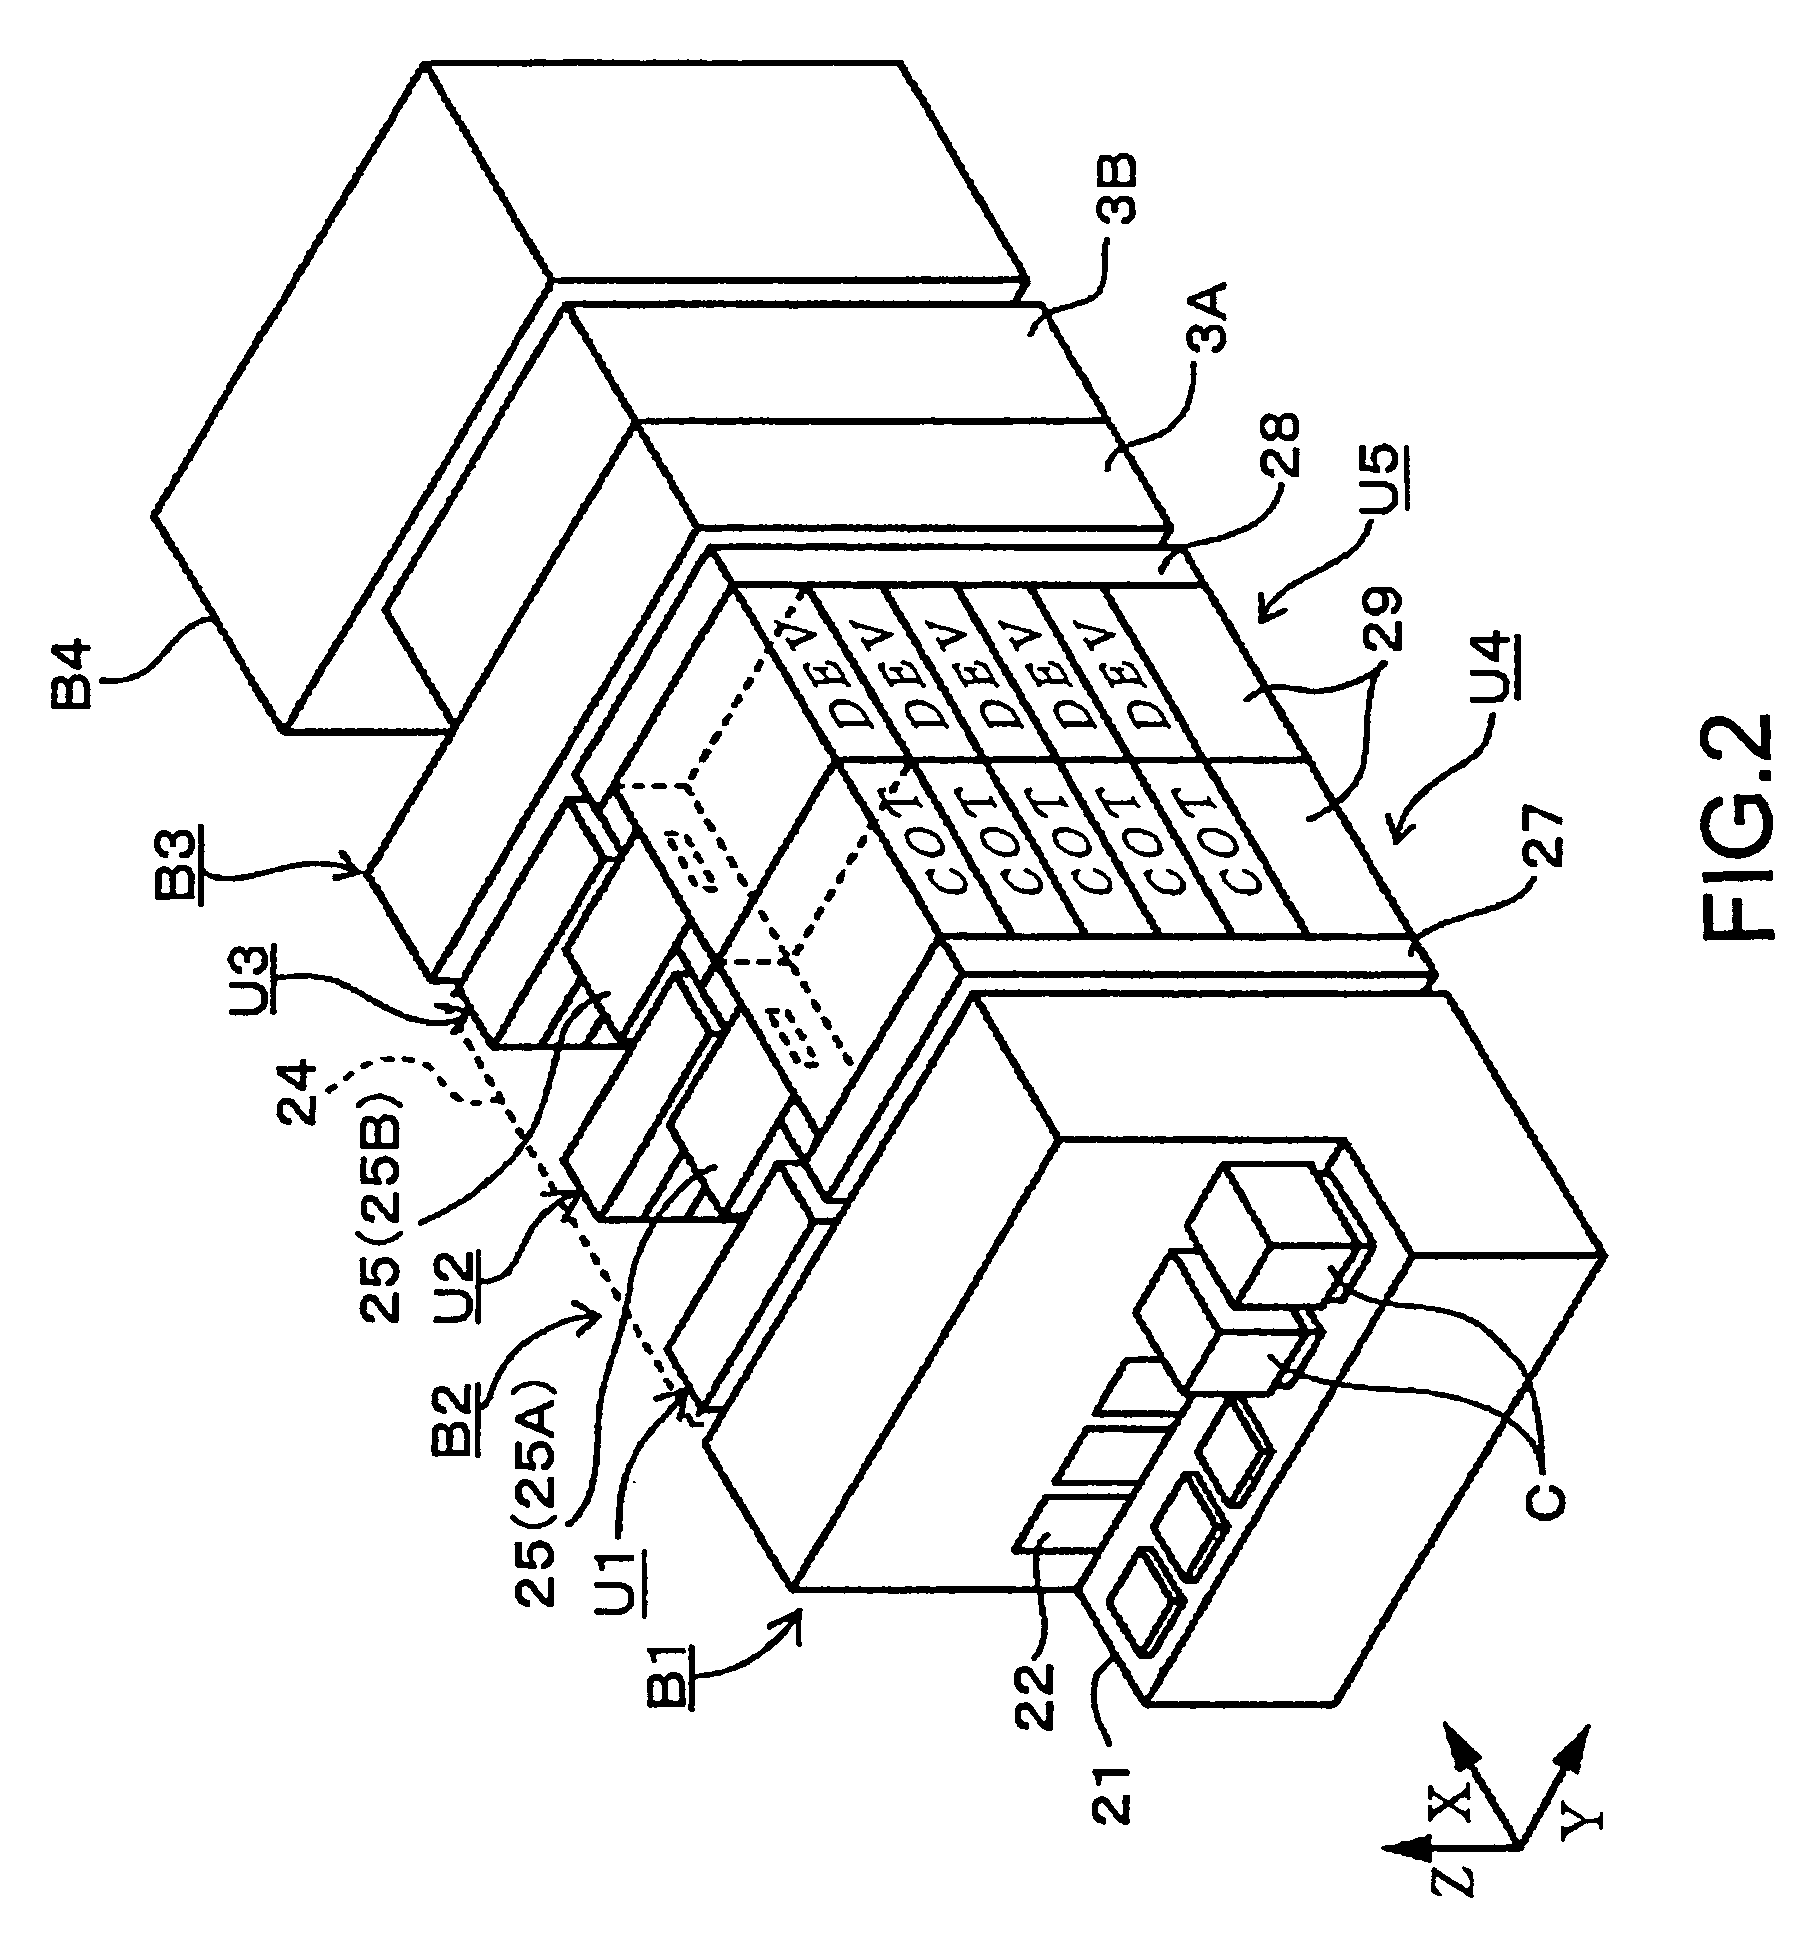 Substrate processing system, coating/developing apparatus, and substrate processing apparatus